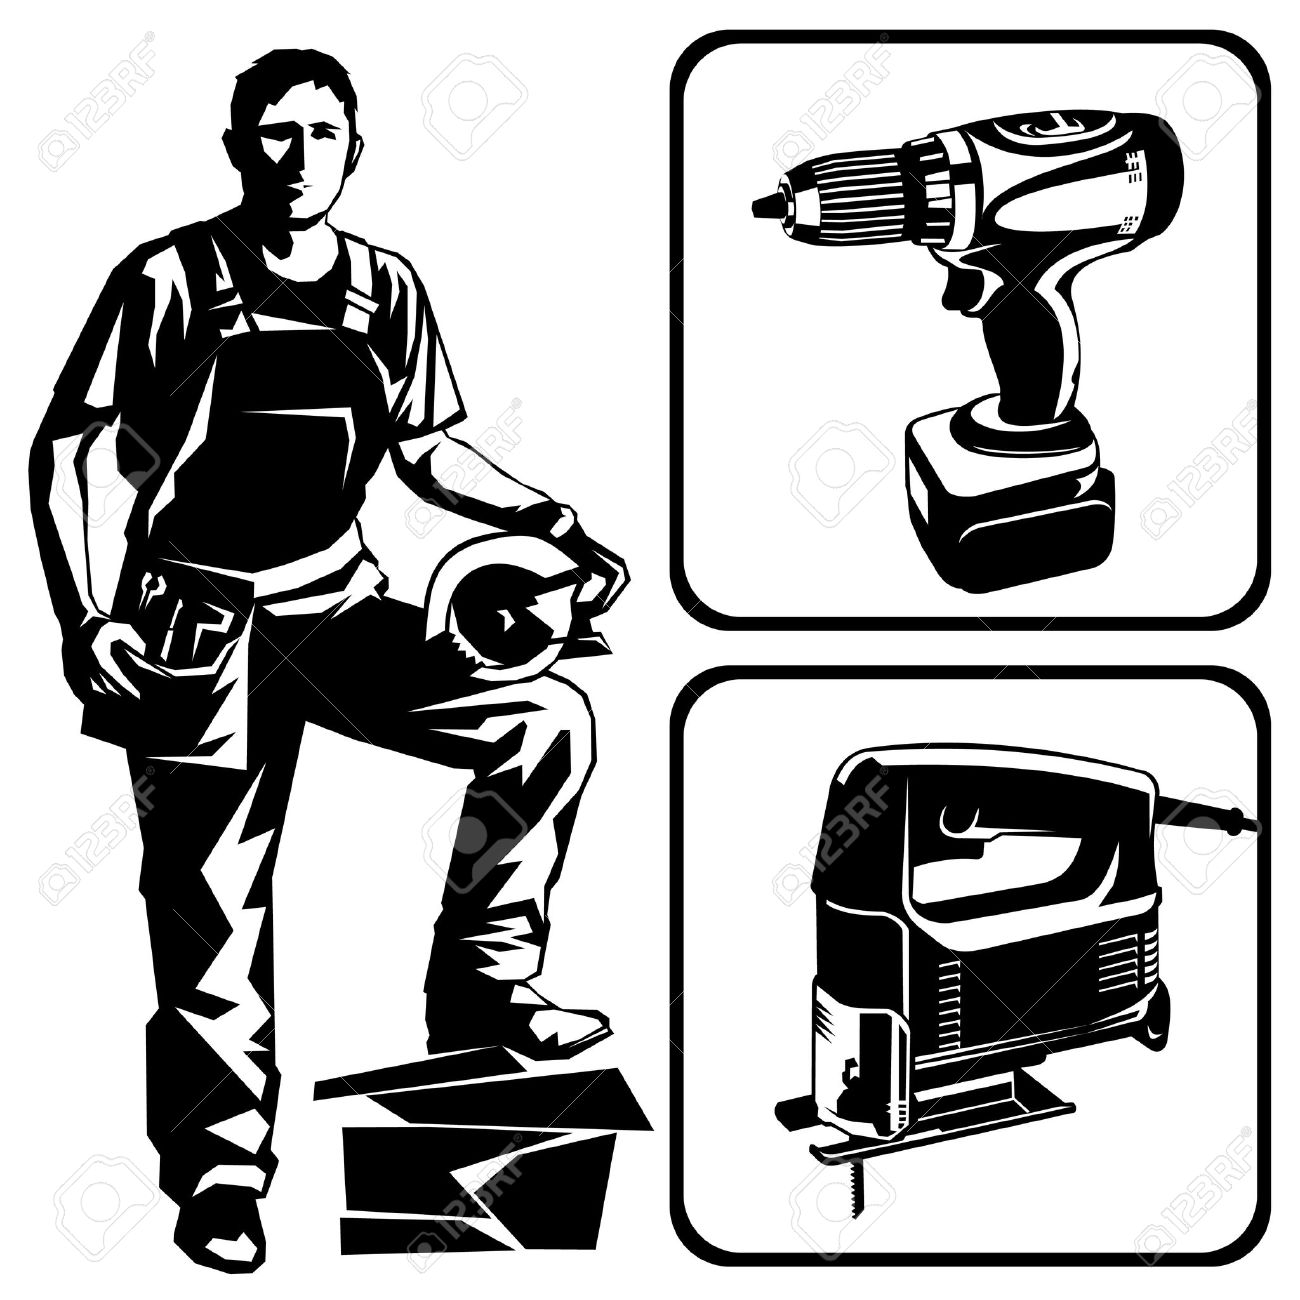 Power Tool Clipart.